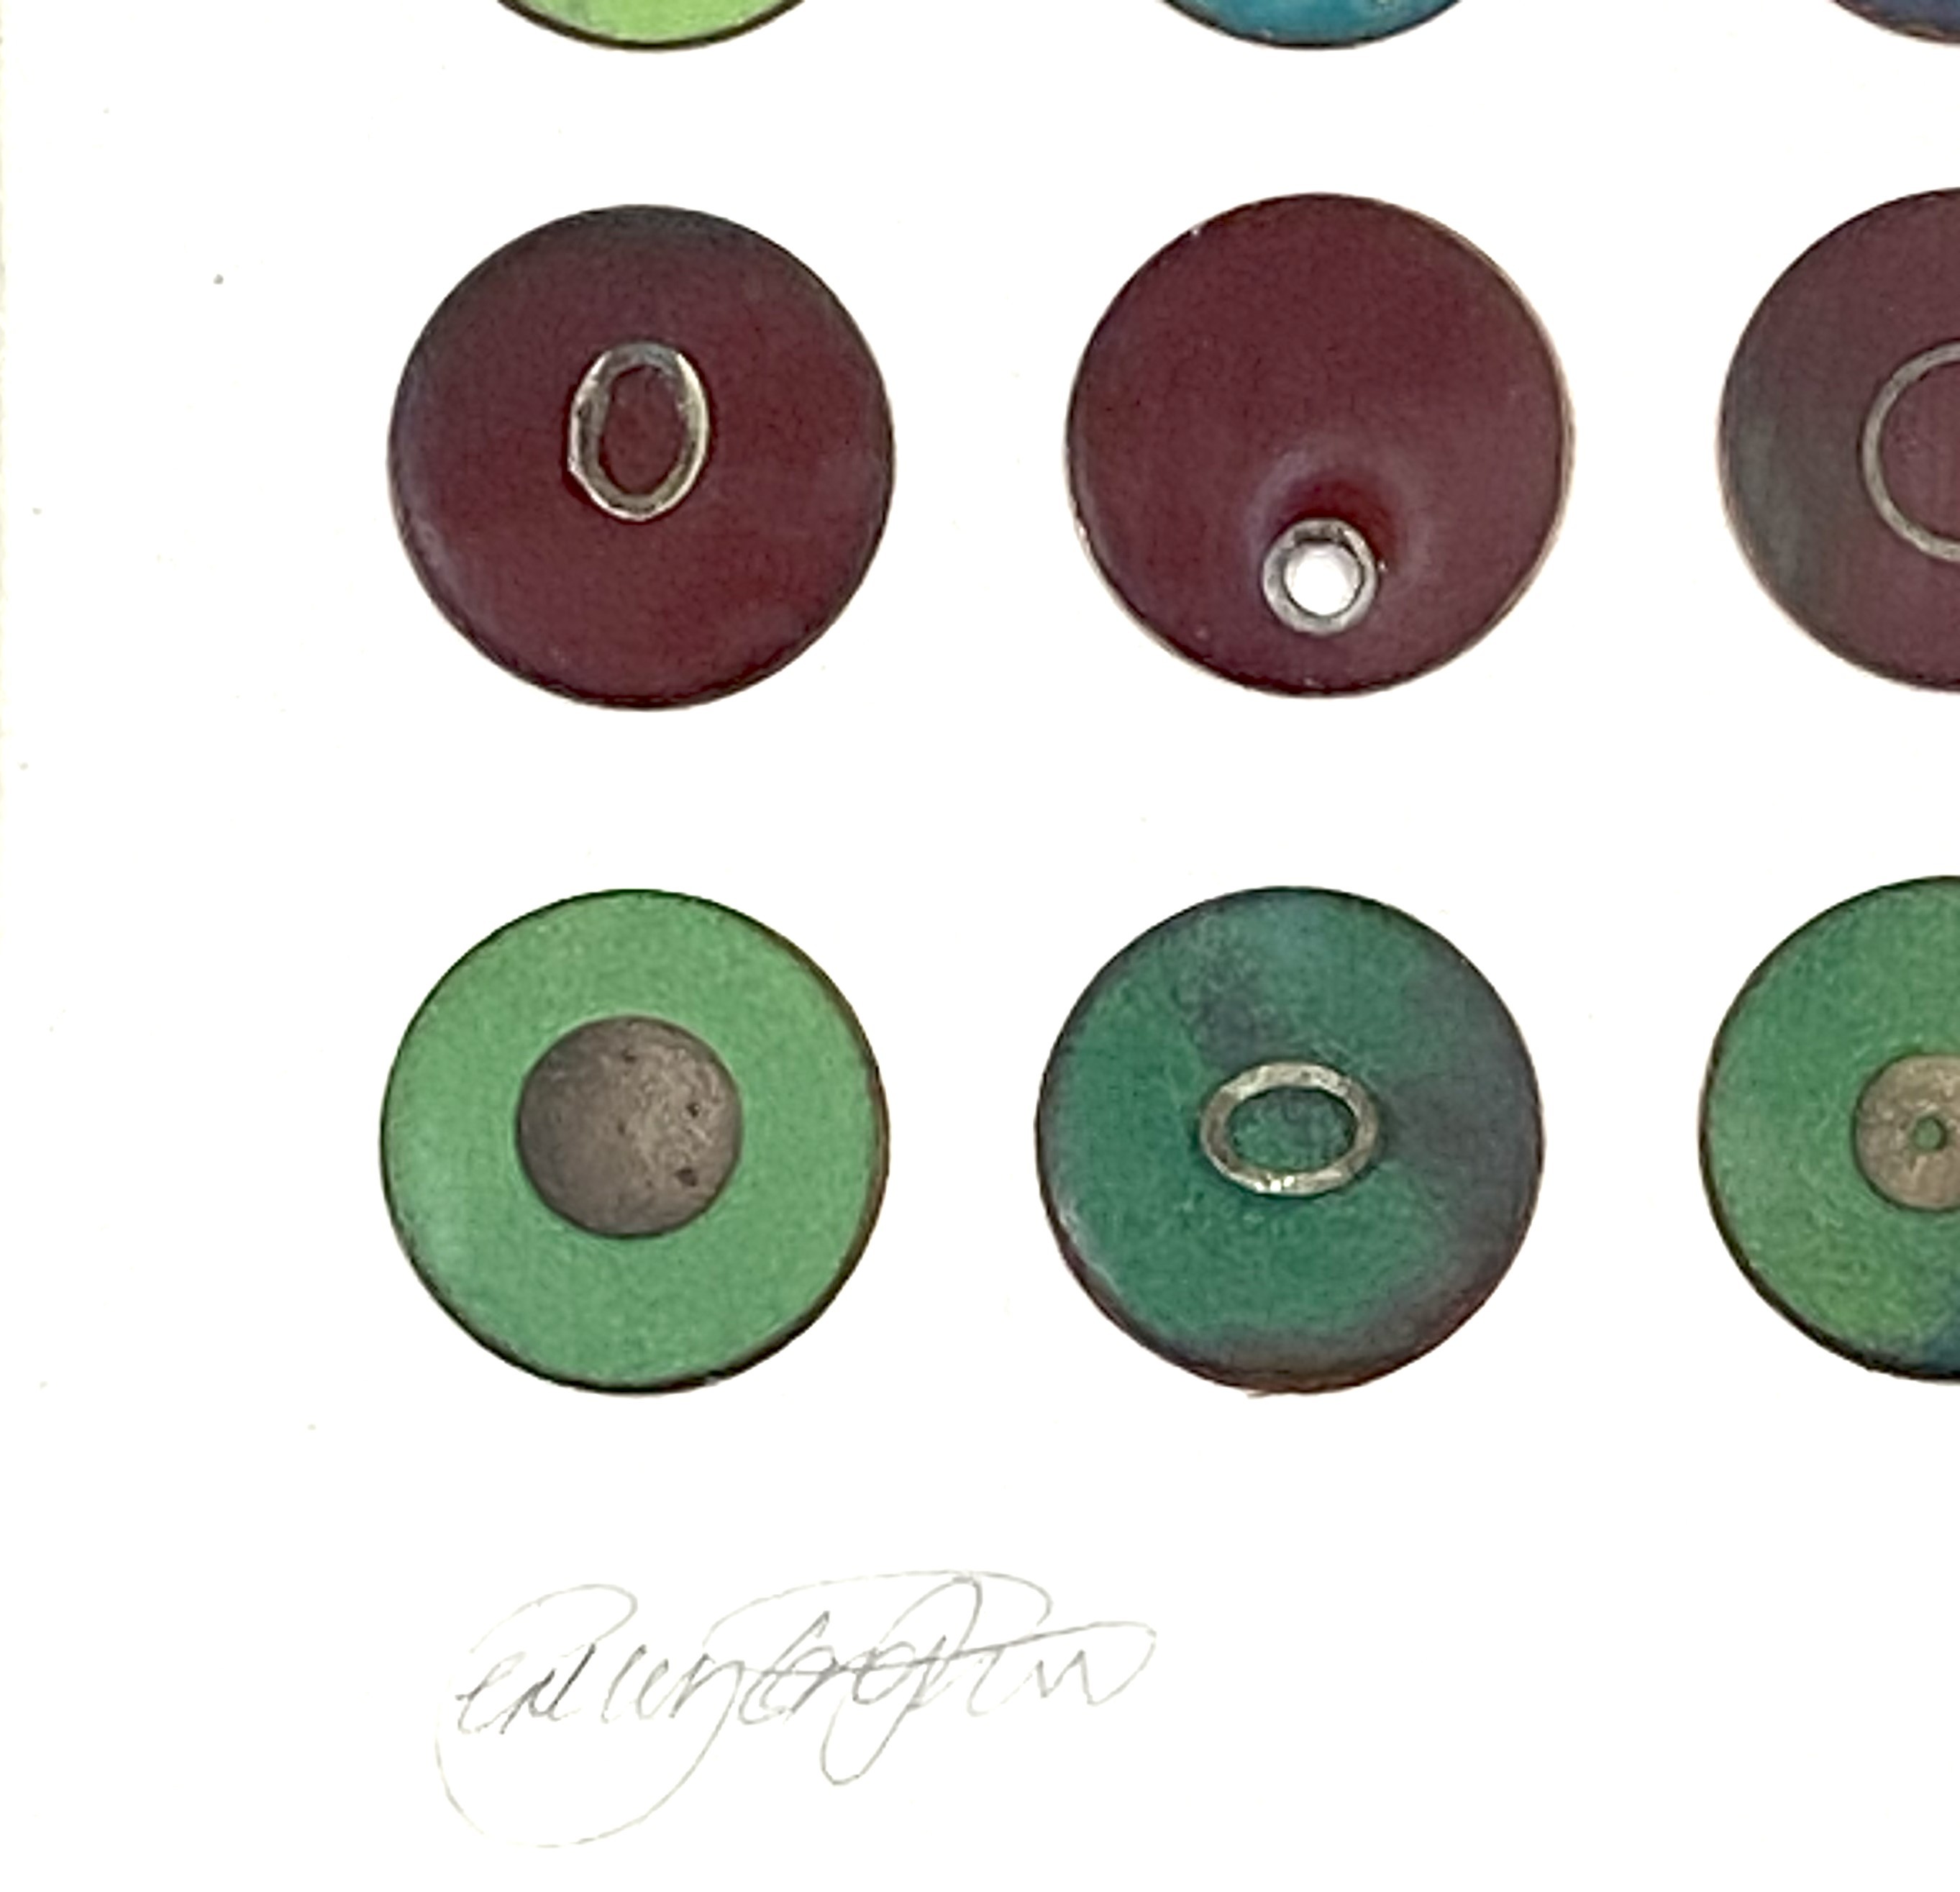 Gilly Langton, Contemporary, Abrstract, mixed media, coloured discs on paper, signed LL, 30cm x - Image 3 of 9